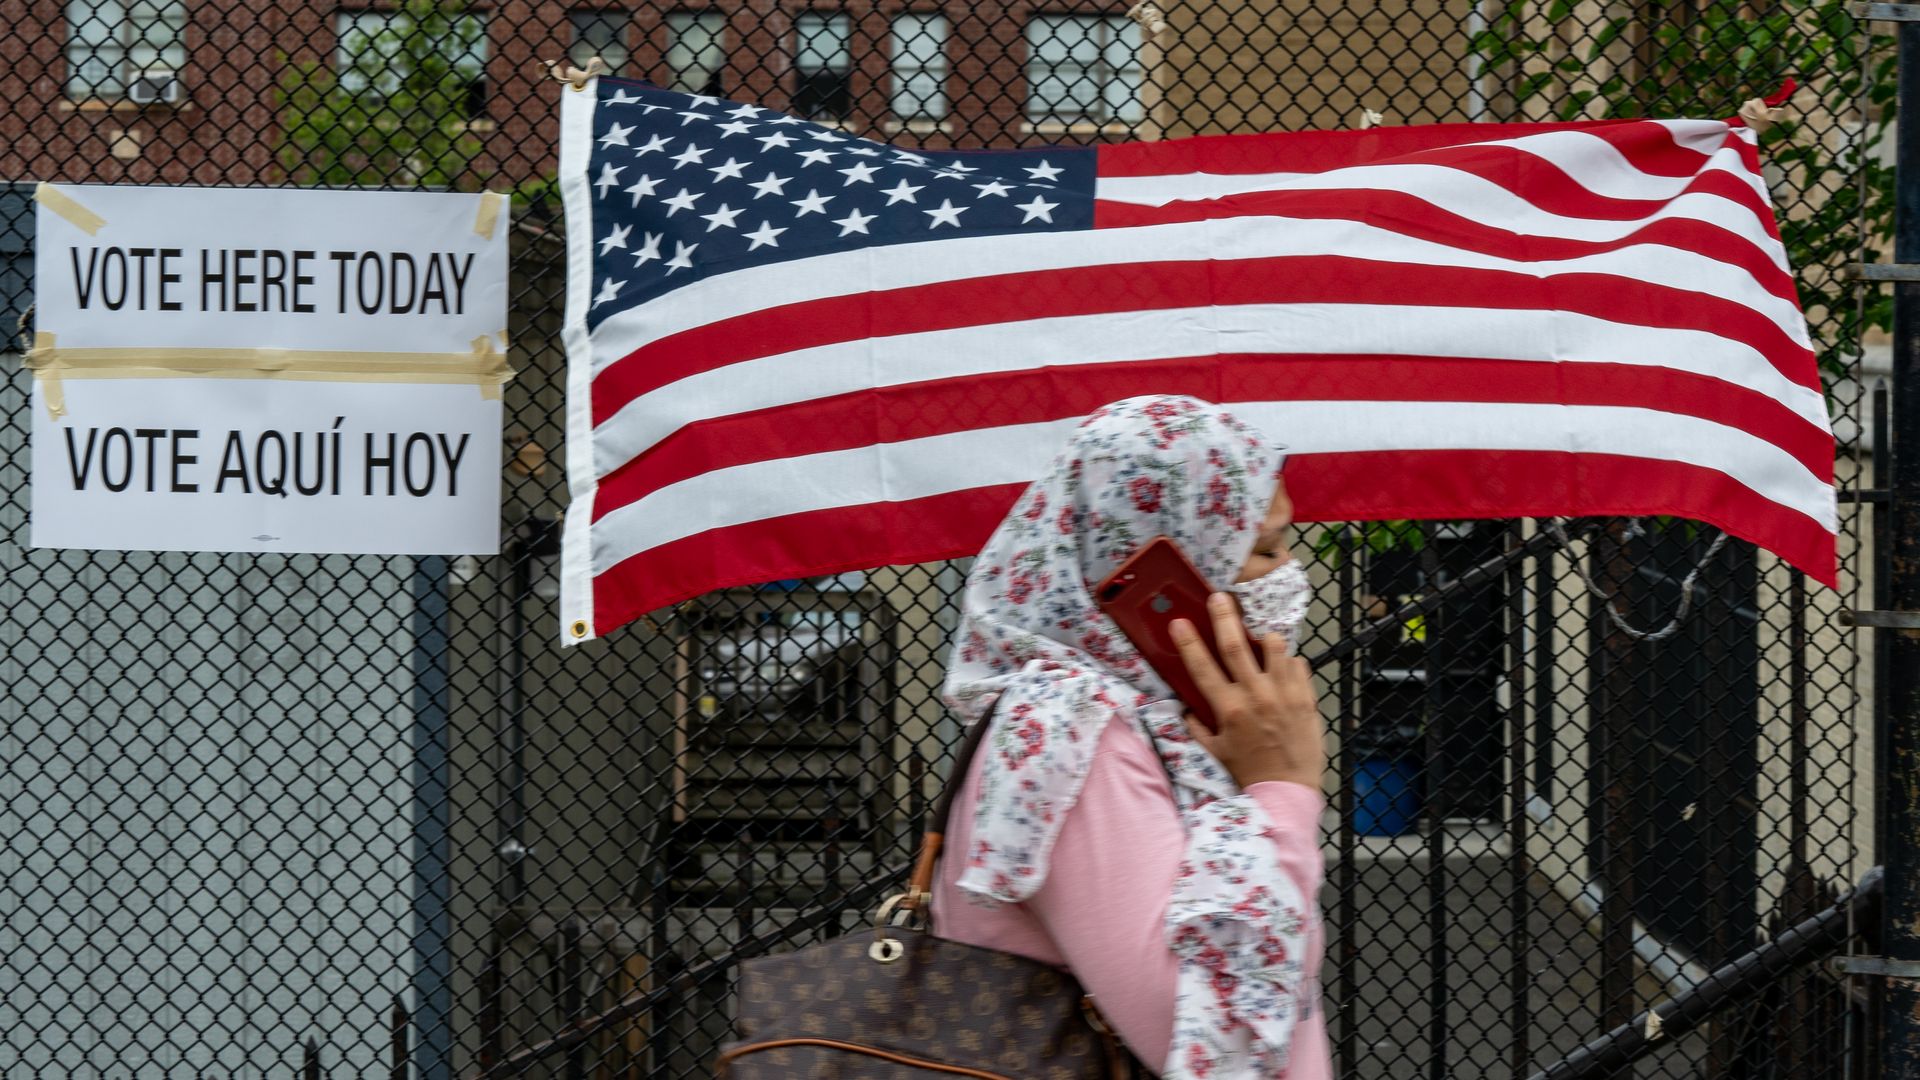 A person walking past an American flag and a voting sign.